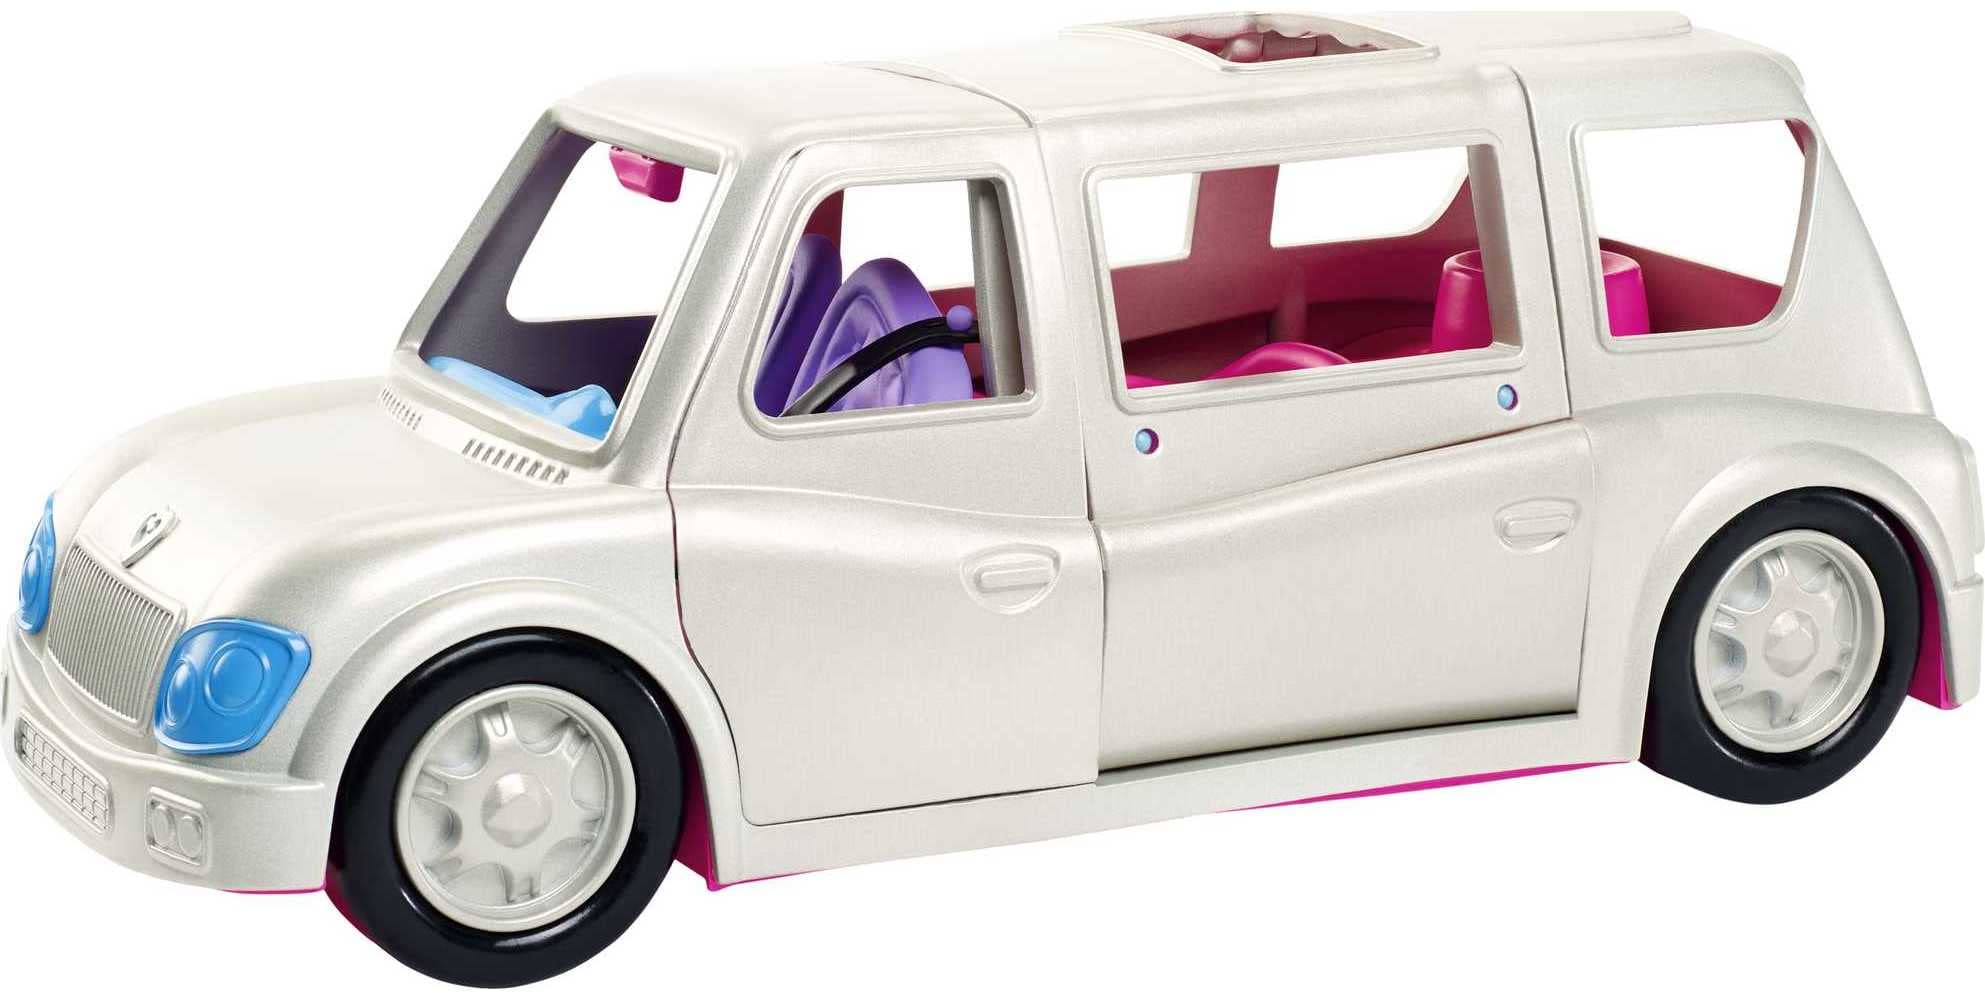 Polly Pocket Vehicle Toy with 3-Inch Doll and 14 Fashion Accessories, Arrive in Style Limo Playset (Amazon Exclusive)